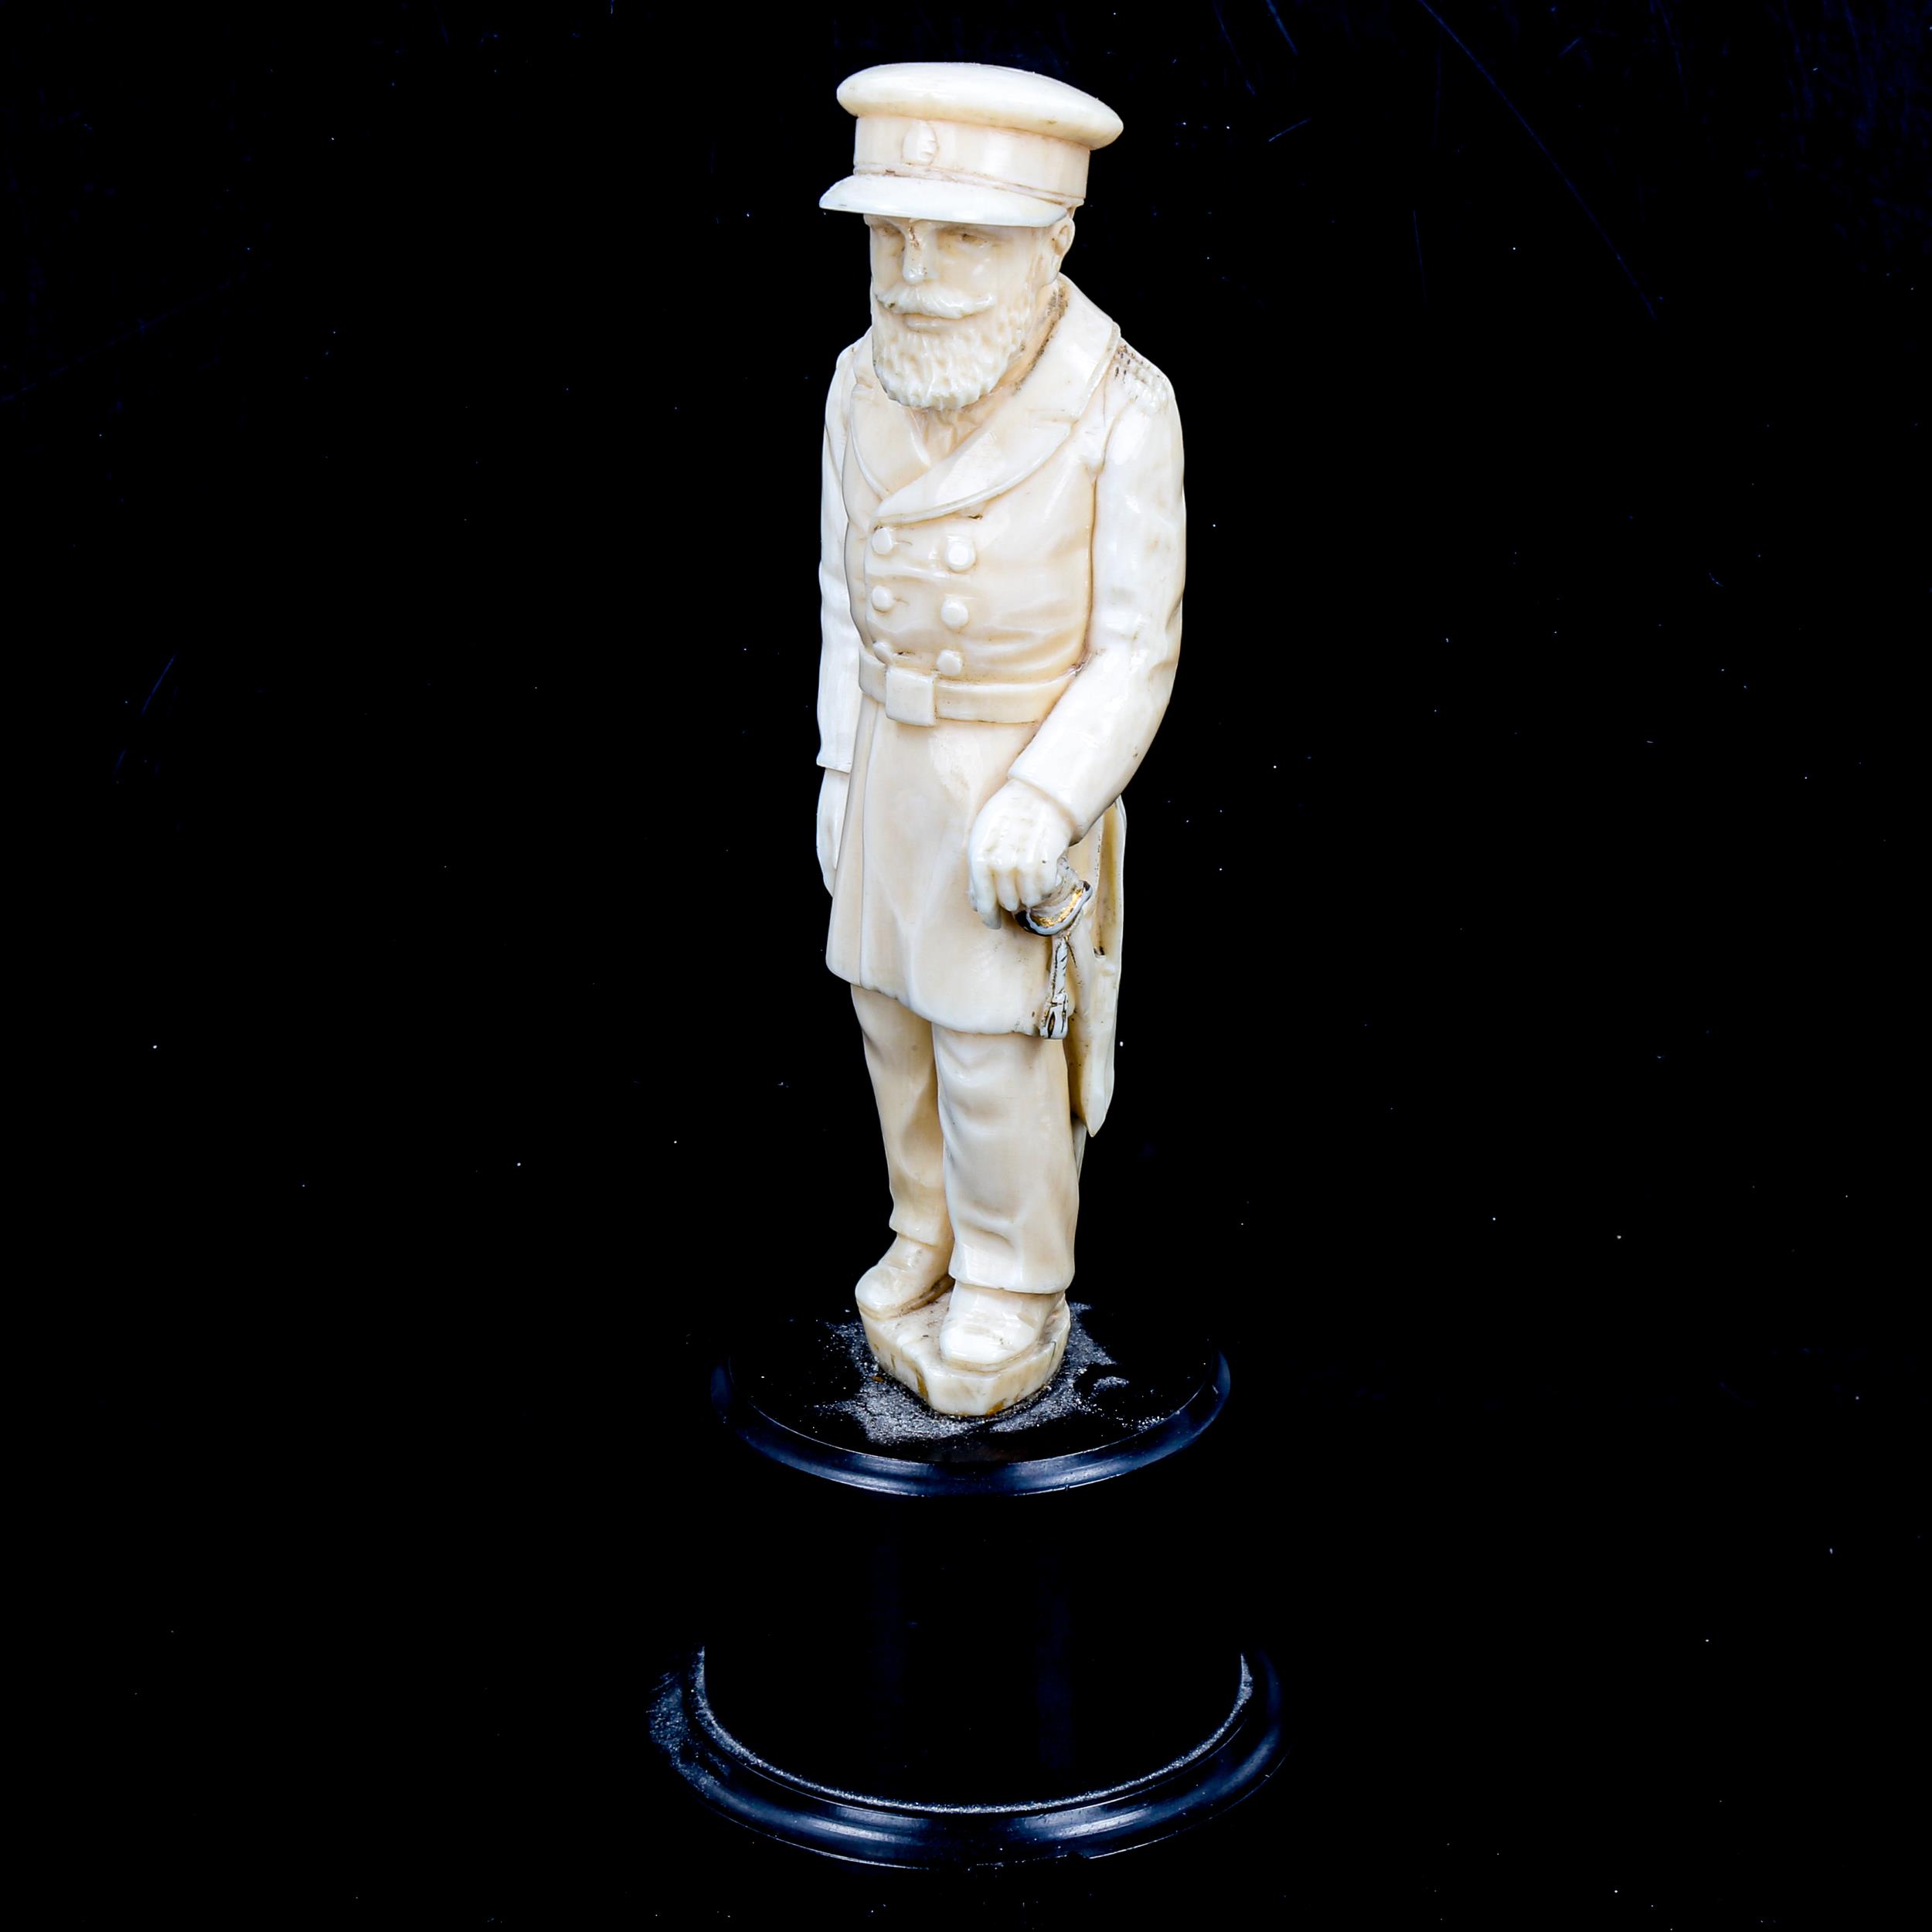 MILITARY INTEREST - a carved ivory figure "The General" believed to be Field Marshall Jan Smuts (